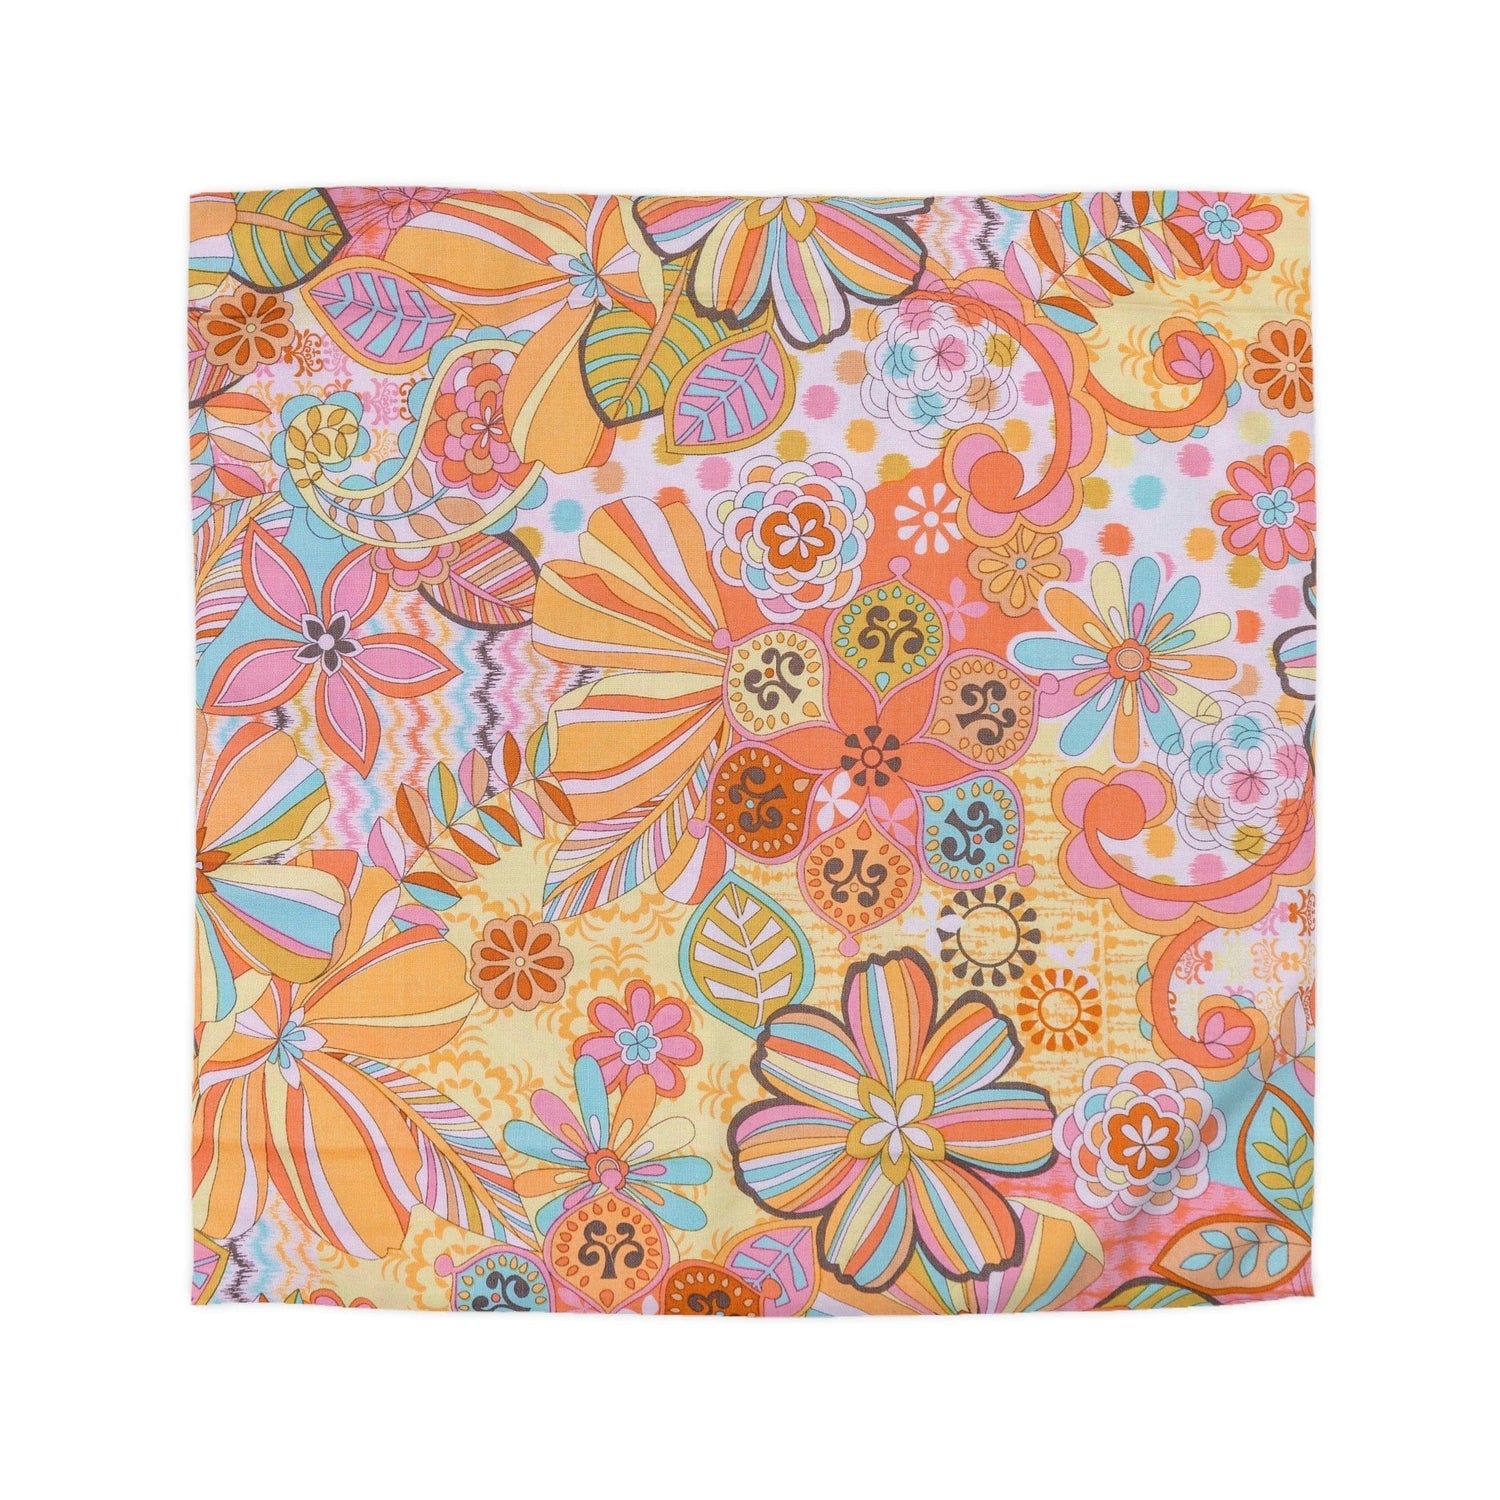 Kate McEnroe New York Retro Trippy Flower Power Duvet Cover, 70s Mid Mod Hippie Chic Floral Bedroom Decor with Groovy Orange, Yellow, and Blue PaletteDuvet Covers84589177089189936786